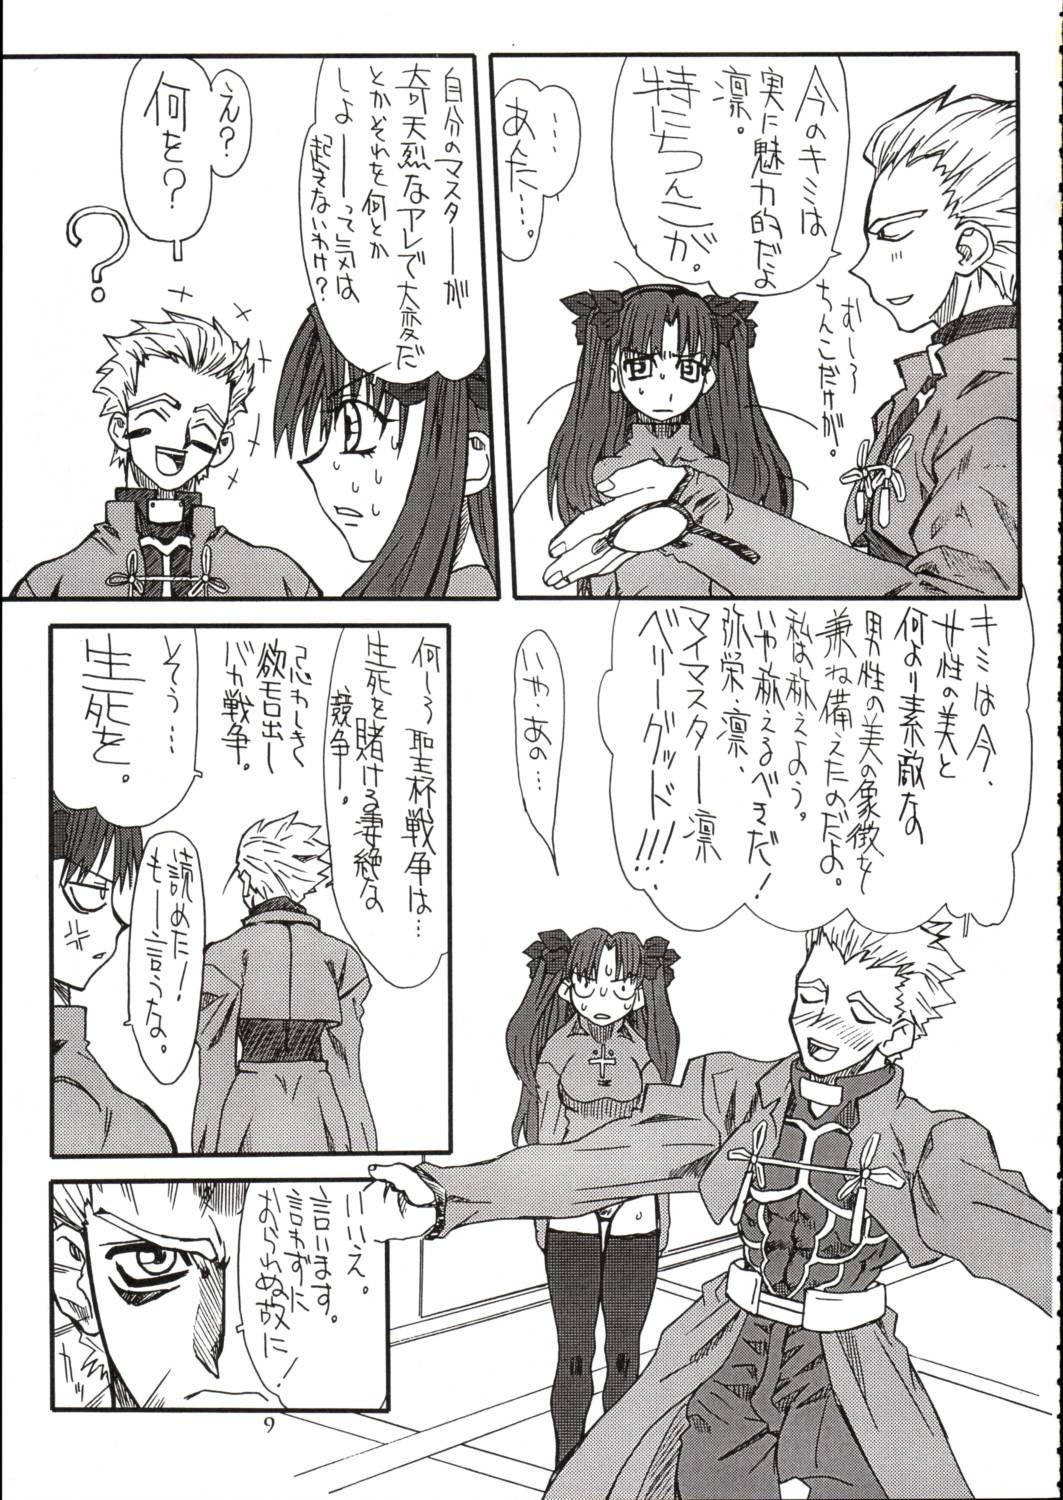 Tiny Titties Azuki Been - Fate stay night Real Sex - Page 8